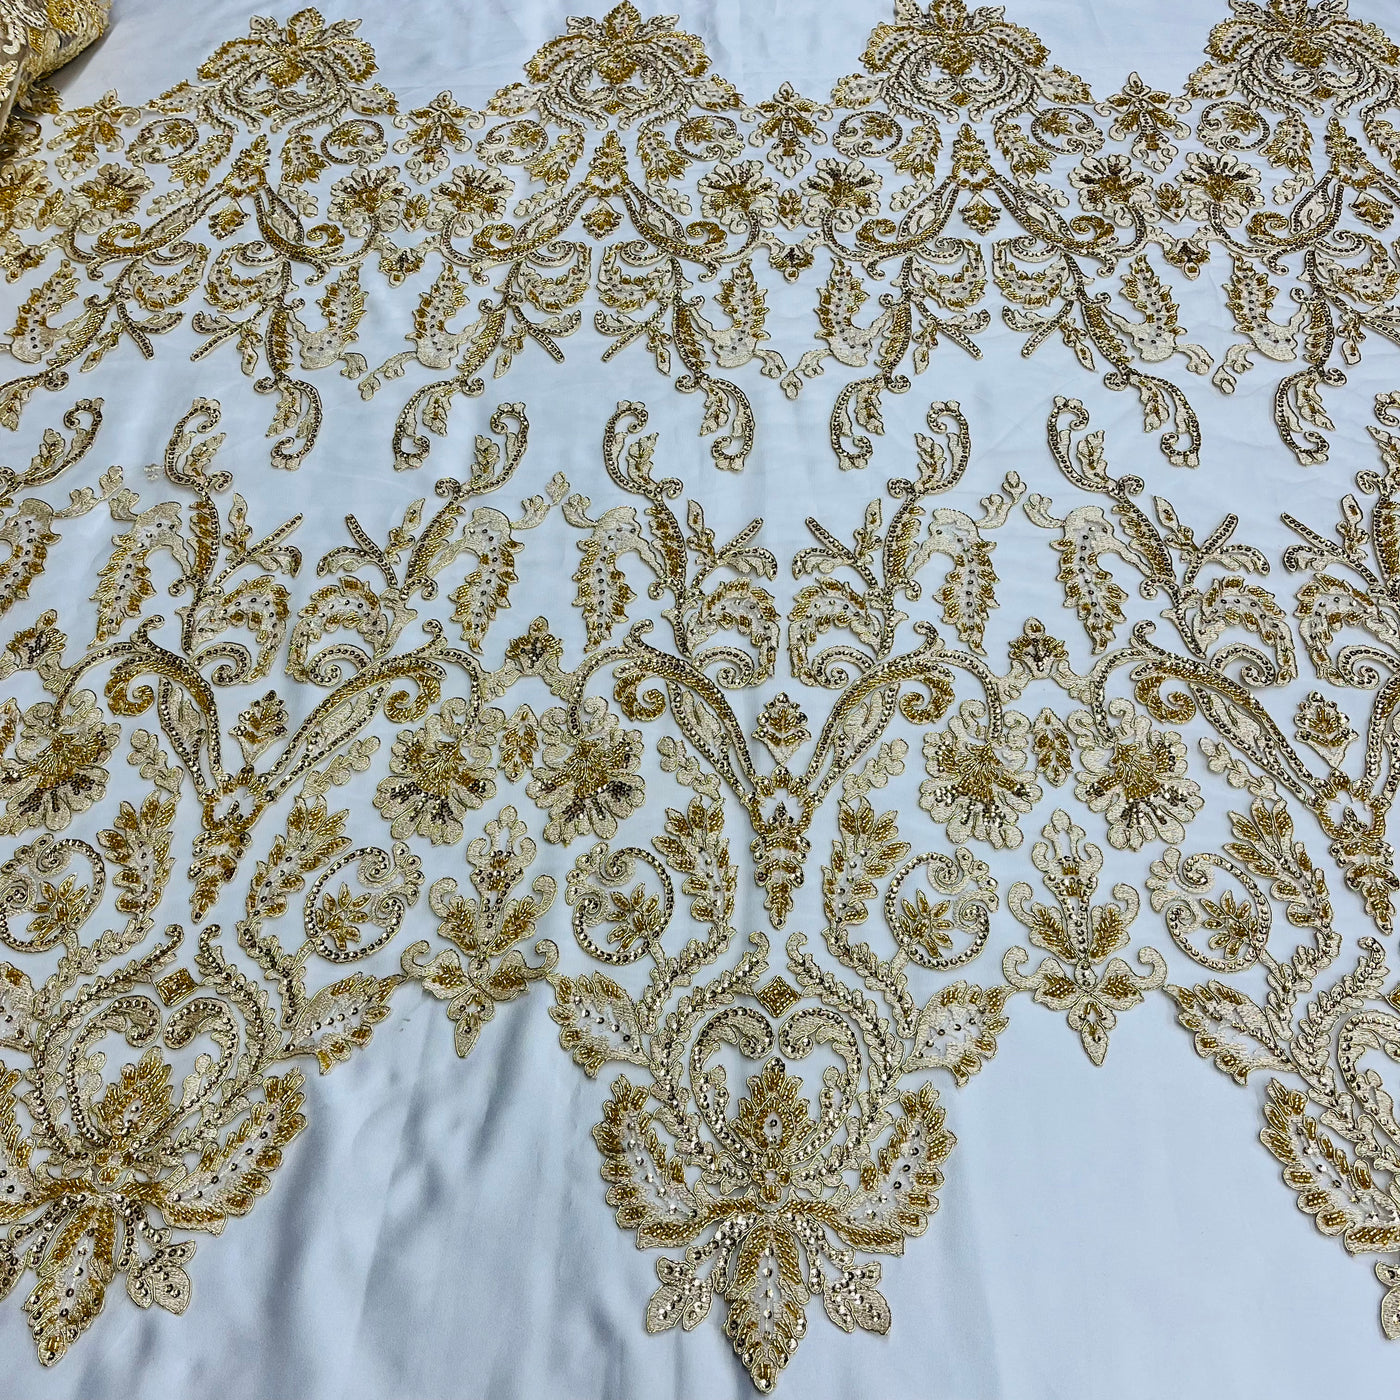 Beaded & Corded Bridal Lace Fabric Embroidered on 100% Polyester Net Mesh Metallic Gold | Lace USA